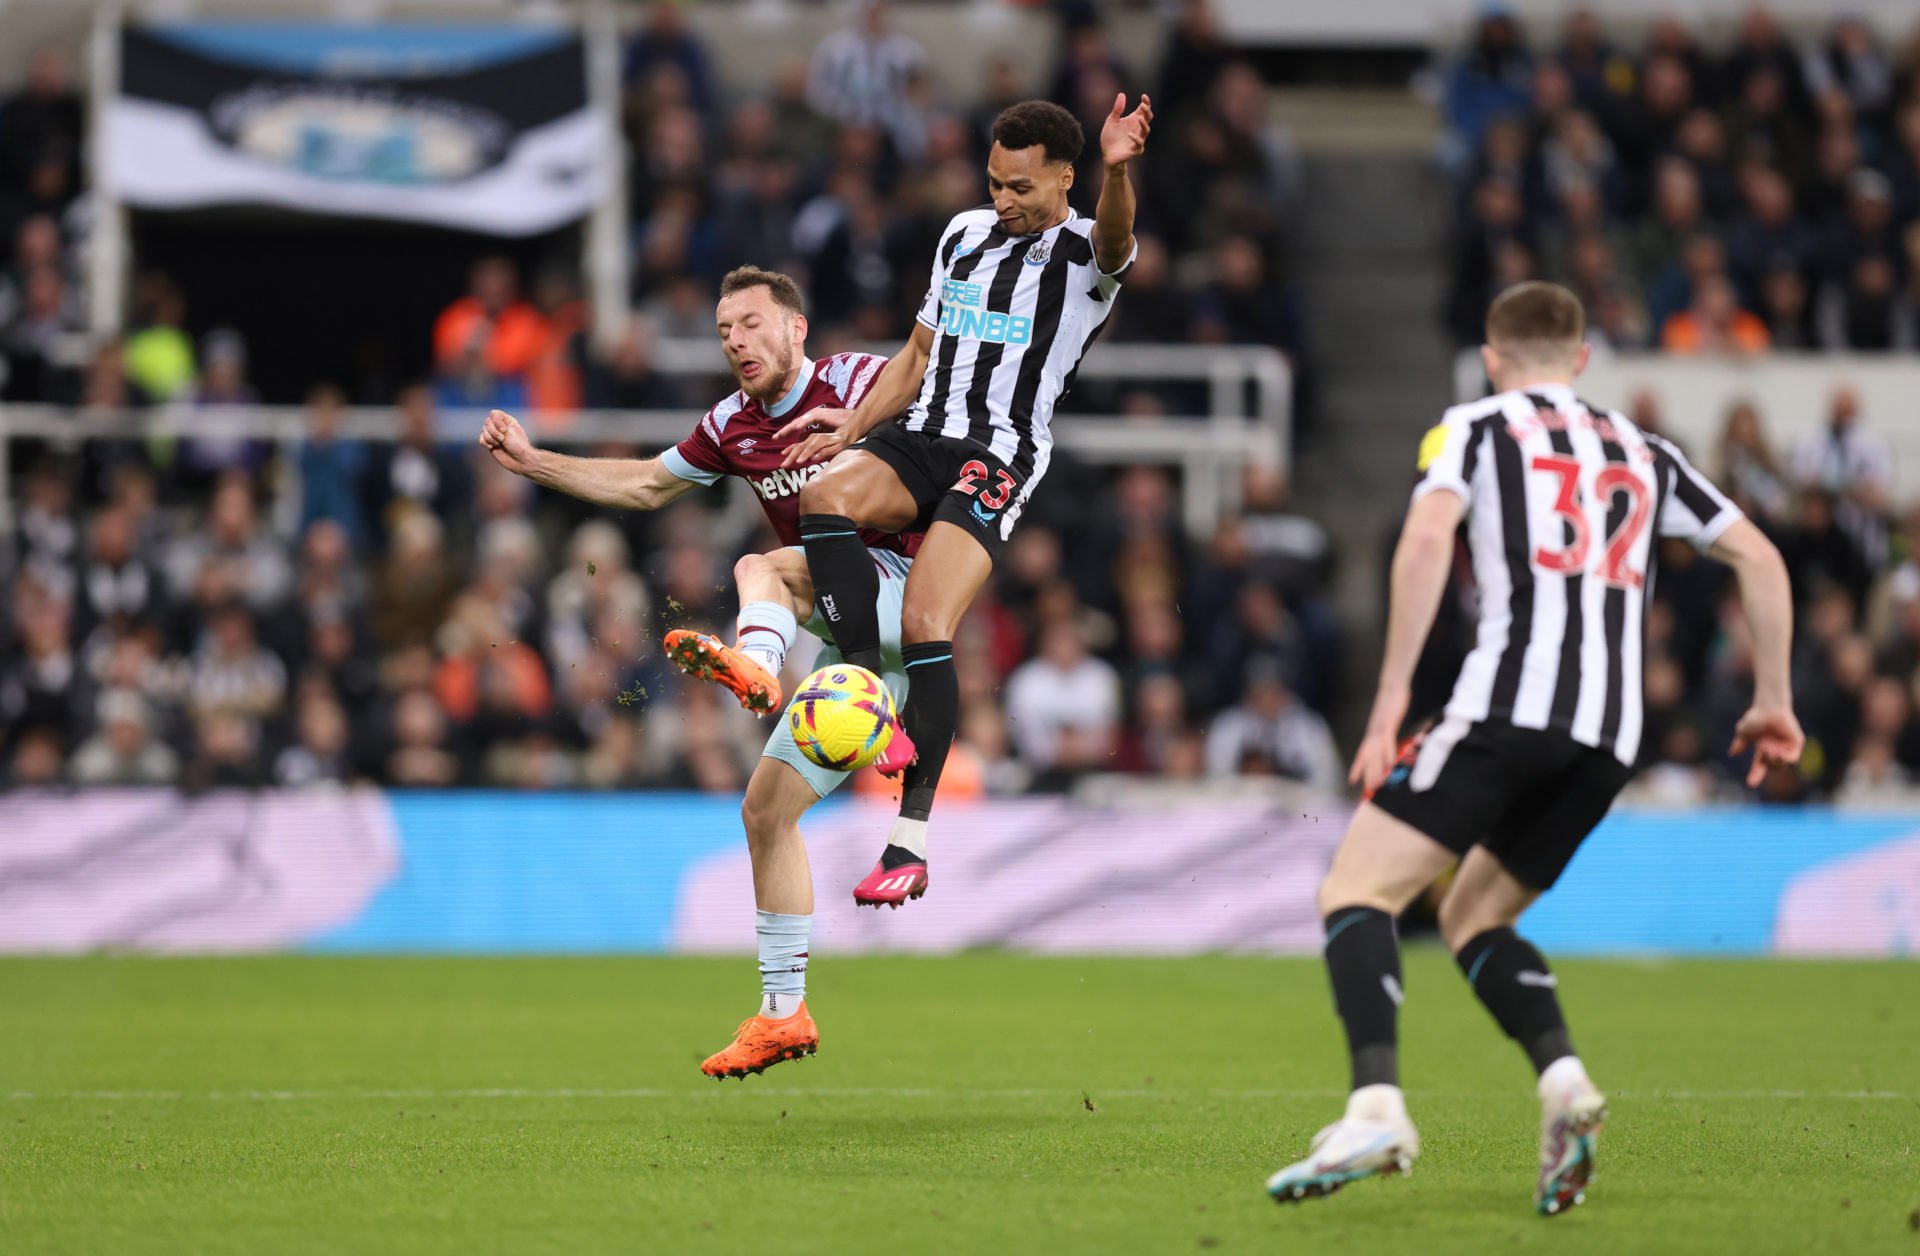 £4 million West Ham ace is back to his best after stunning performance vs Newcastle